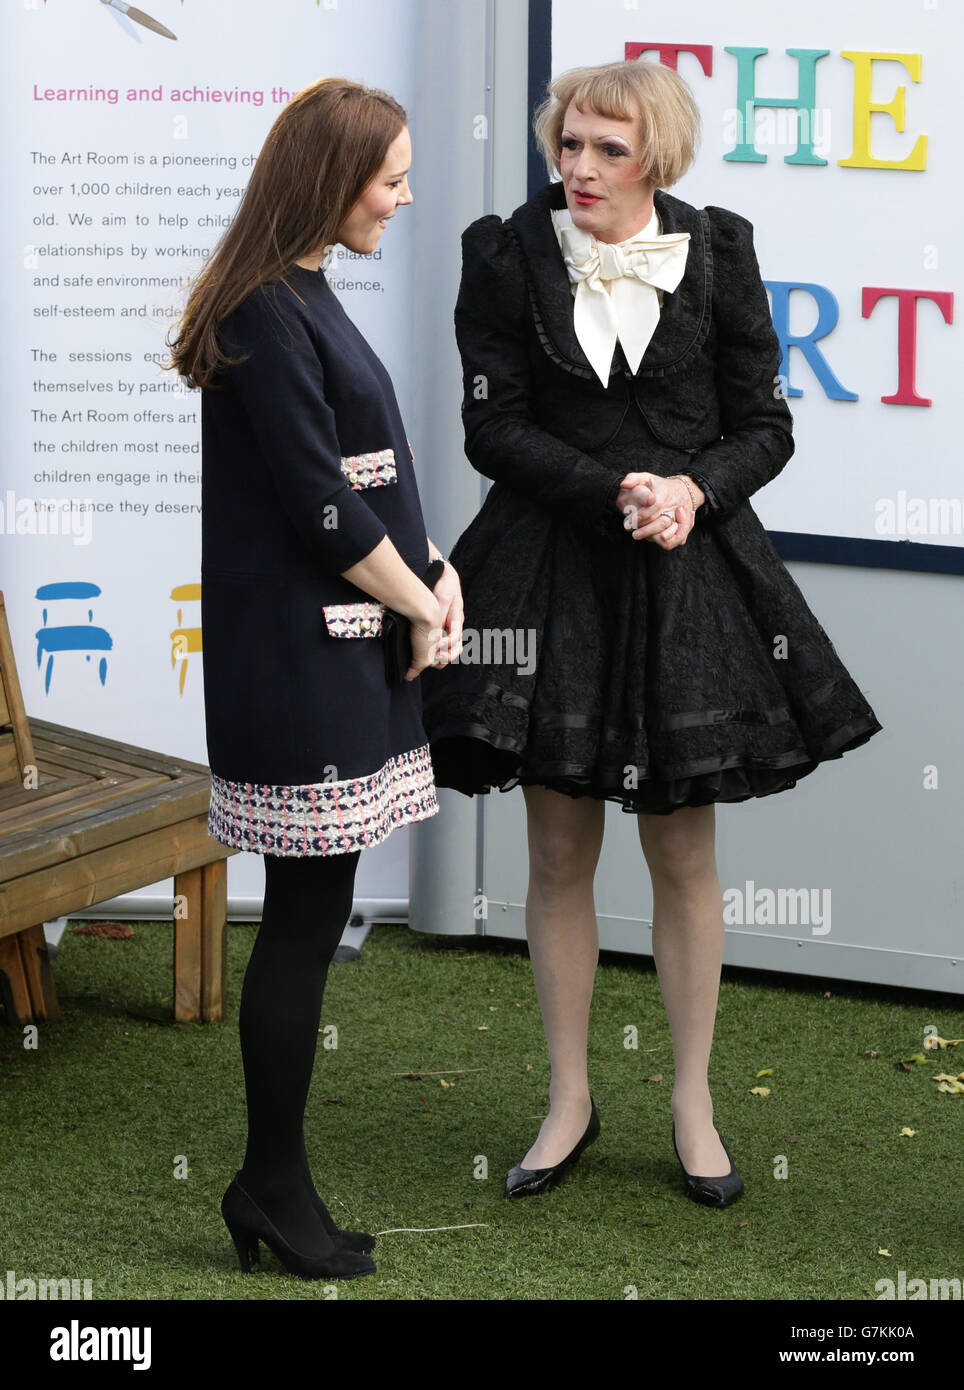 The Duchess of Cambridge (left) with Grayson Perry at Barlby Primary School, in London, where she will officially name The Clore Art Room - a national charity which offers art as therapy to children and young people aged five to 16 who are facing challenges in their lives. PRESS ASSOCIATION Photo. Picture date: Thursday January 15, 2015. Photo credit should read: Yui Mok/PA Wire Stock Photo